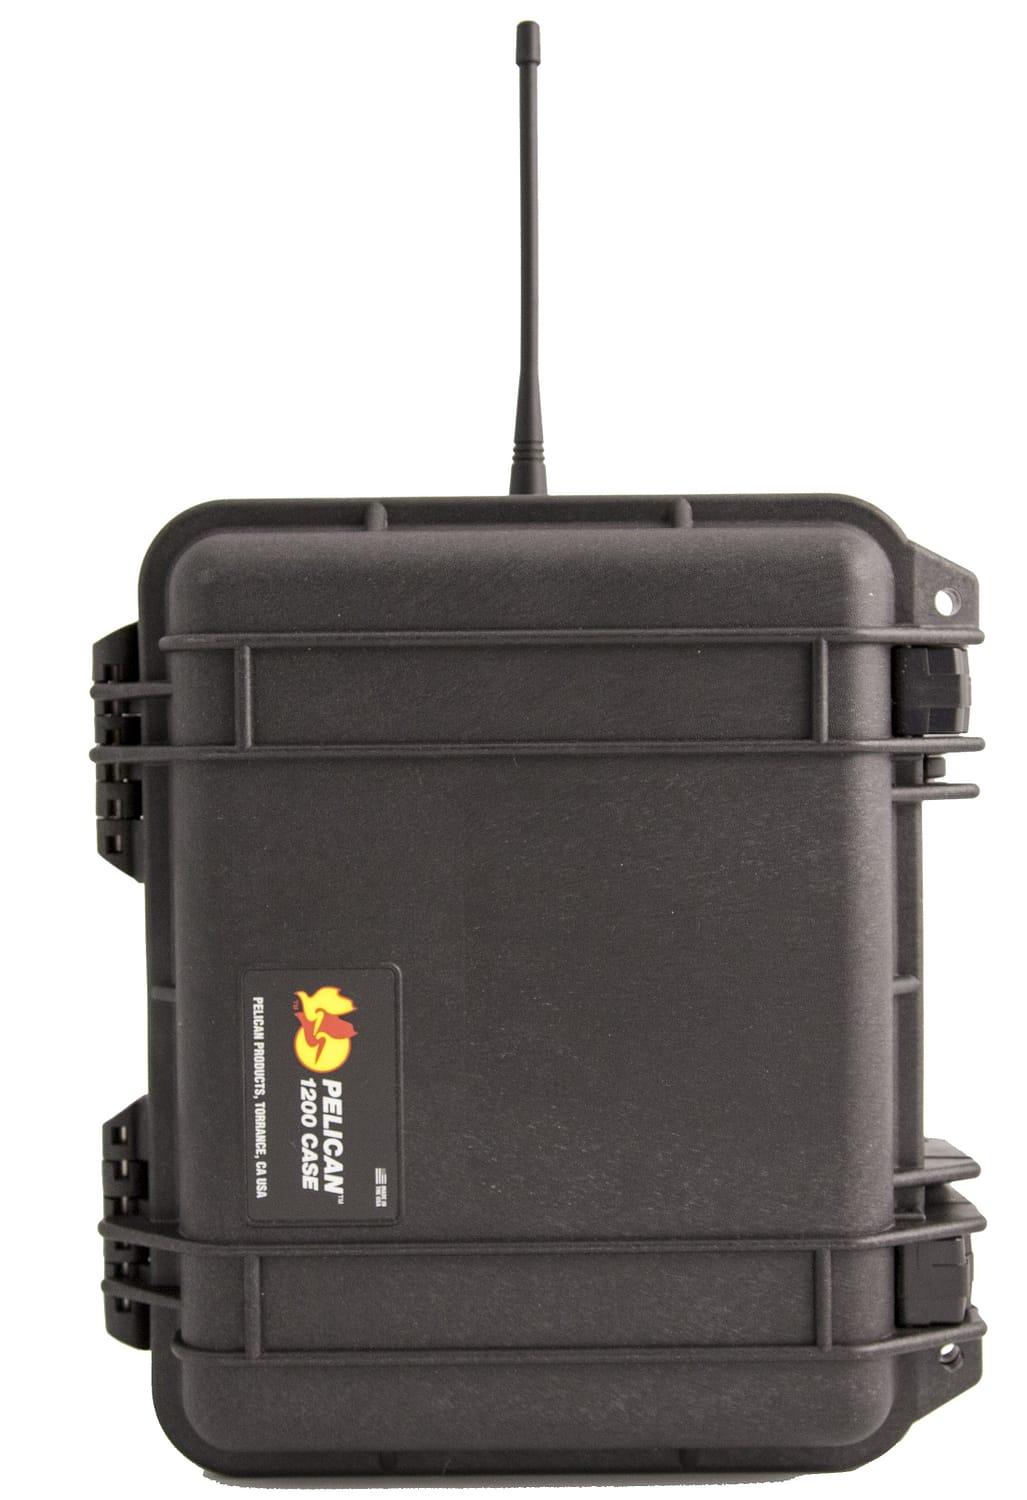 UHF 10-45 Mobile Repeater